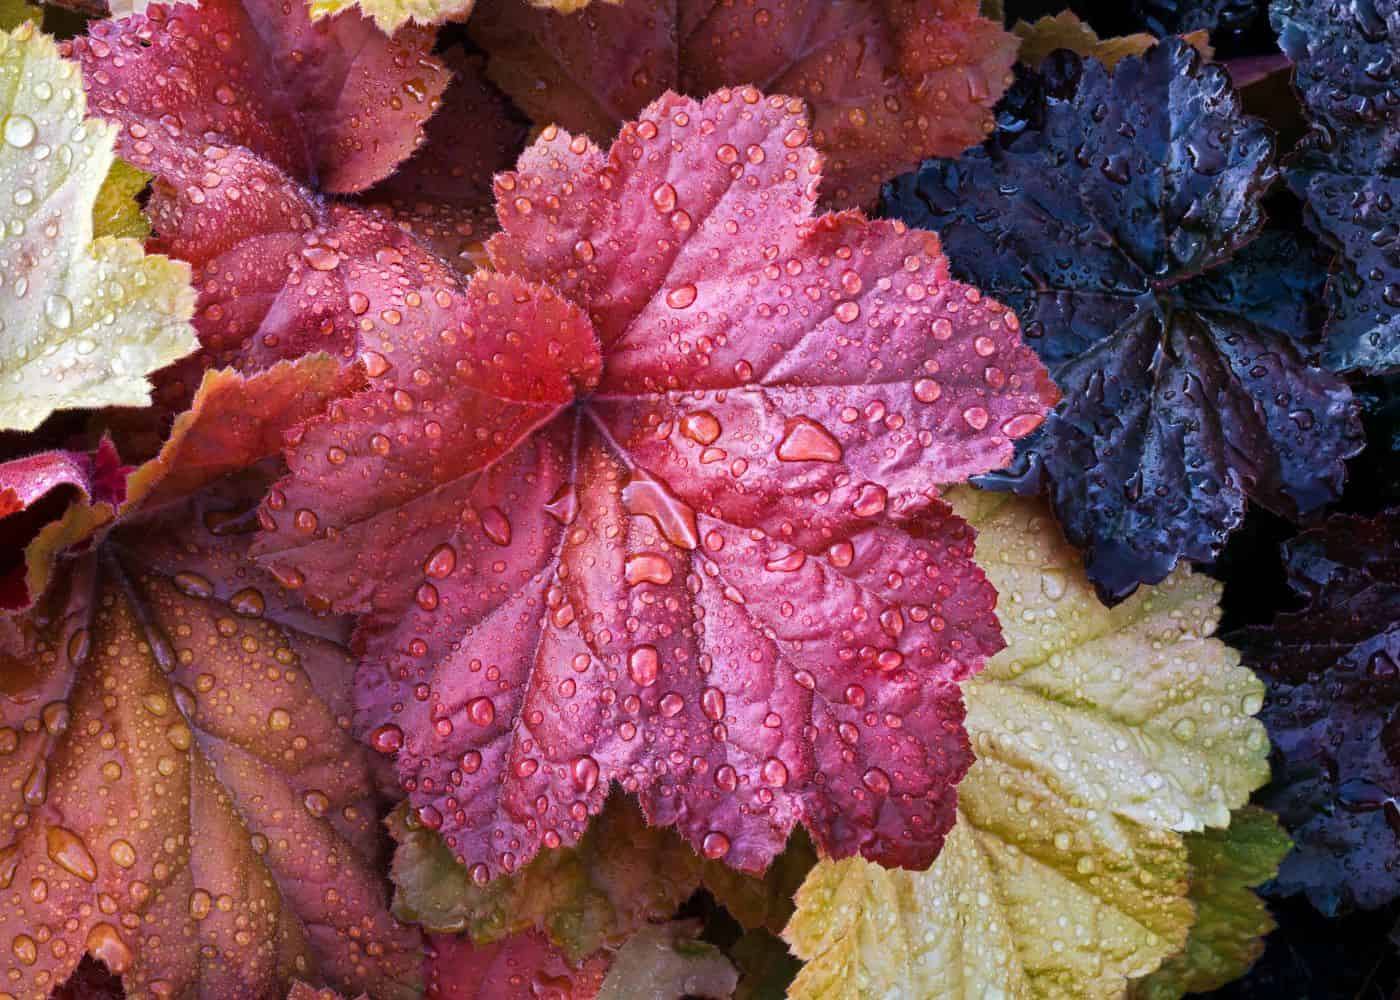 Coral bells - leaves in the autumn rains